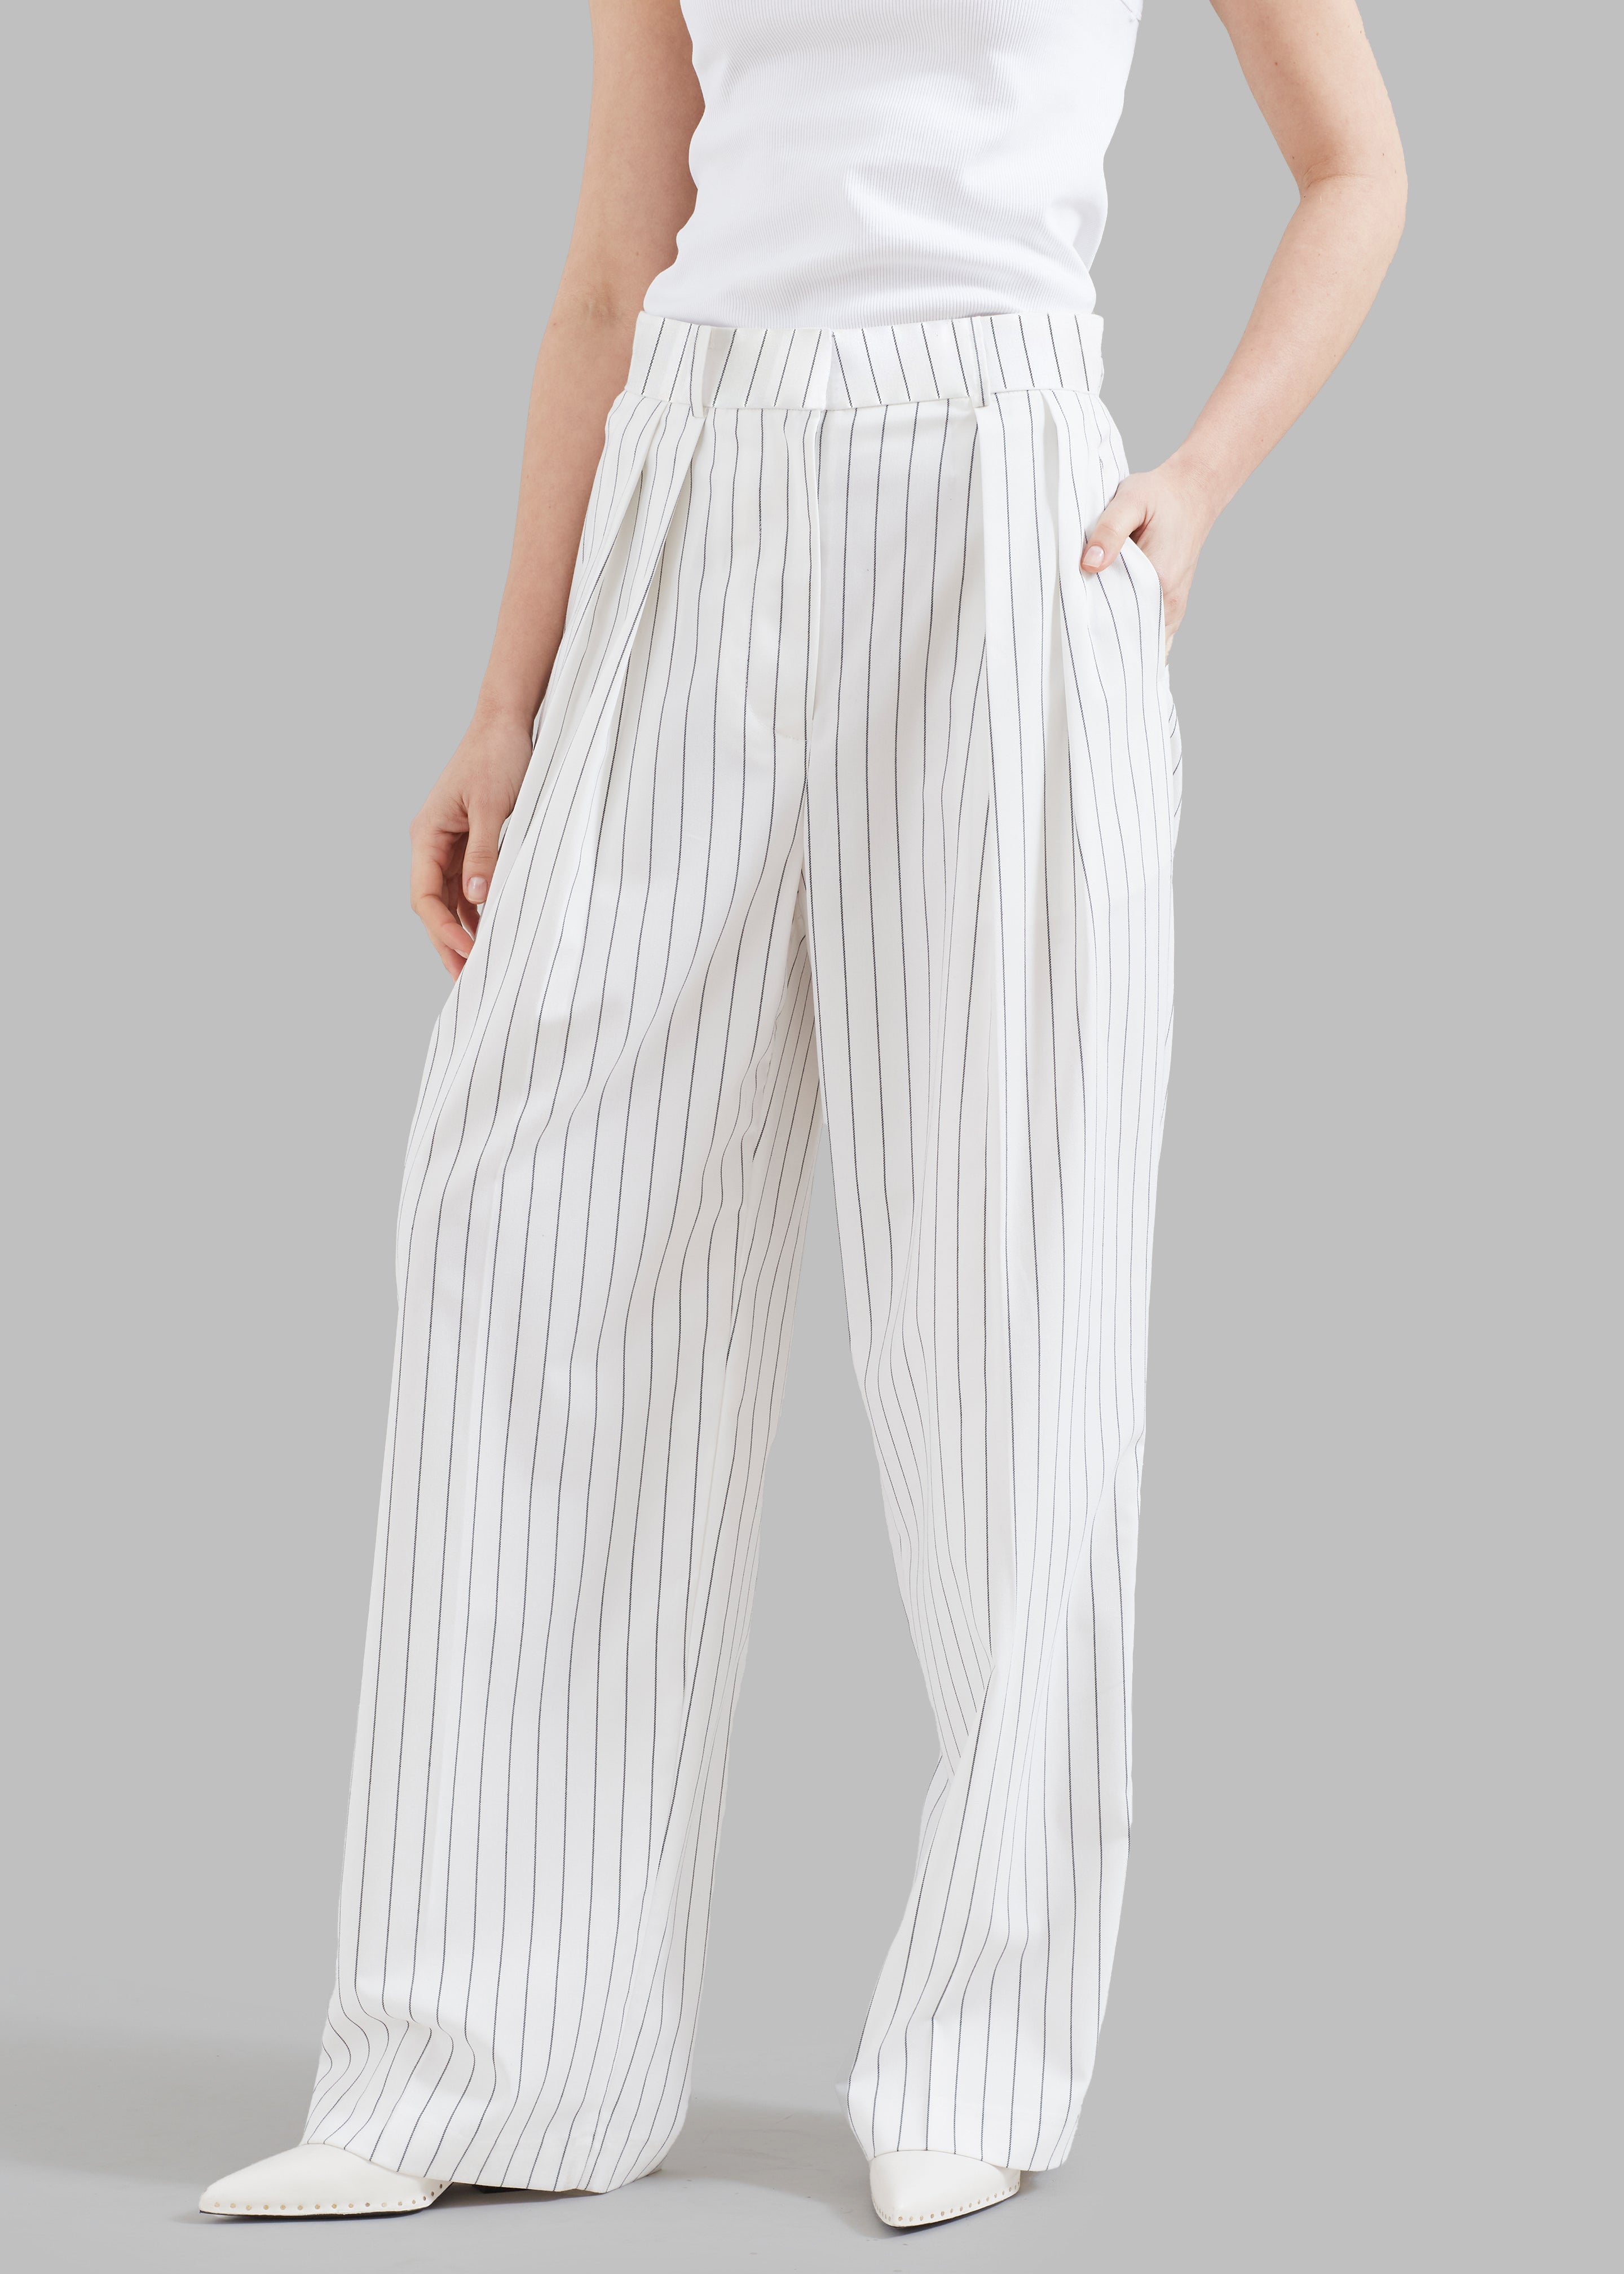 Tansy Fluid Pleated Trousers - White - 2